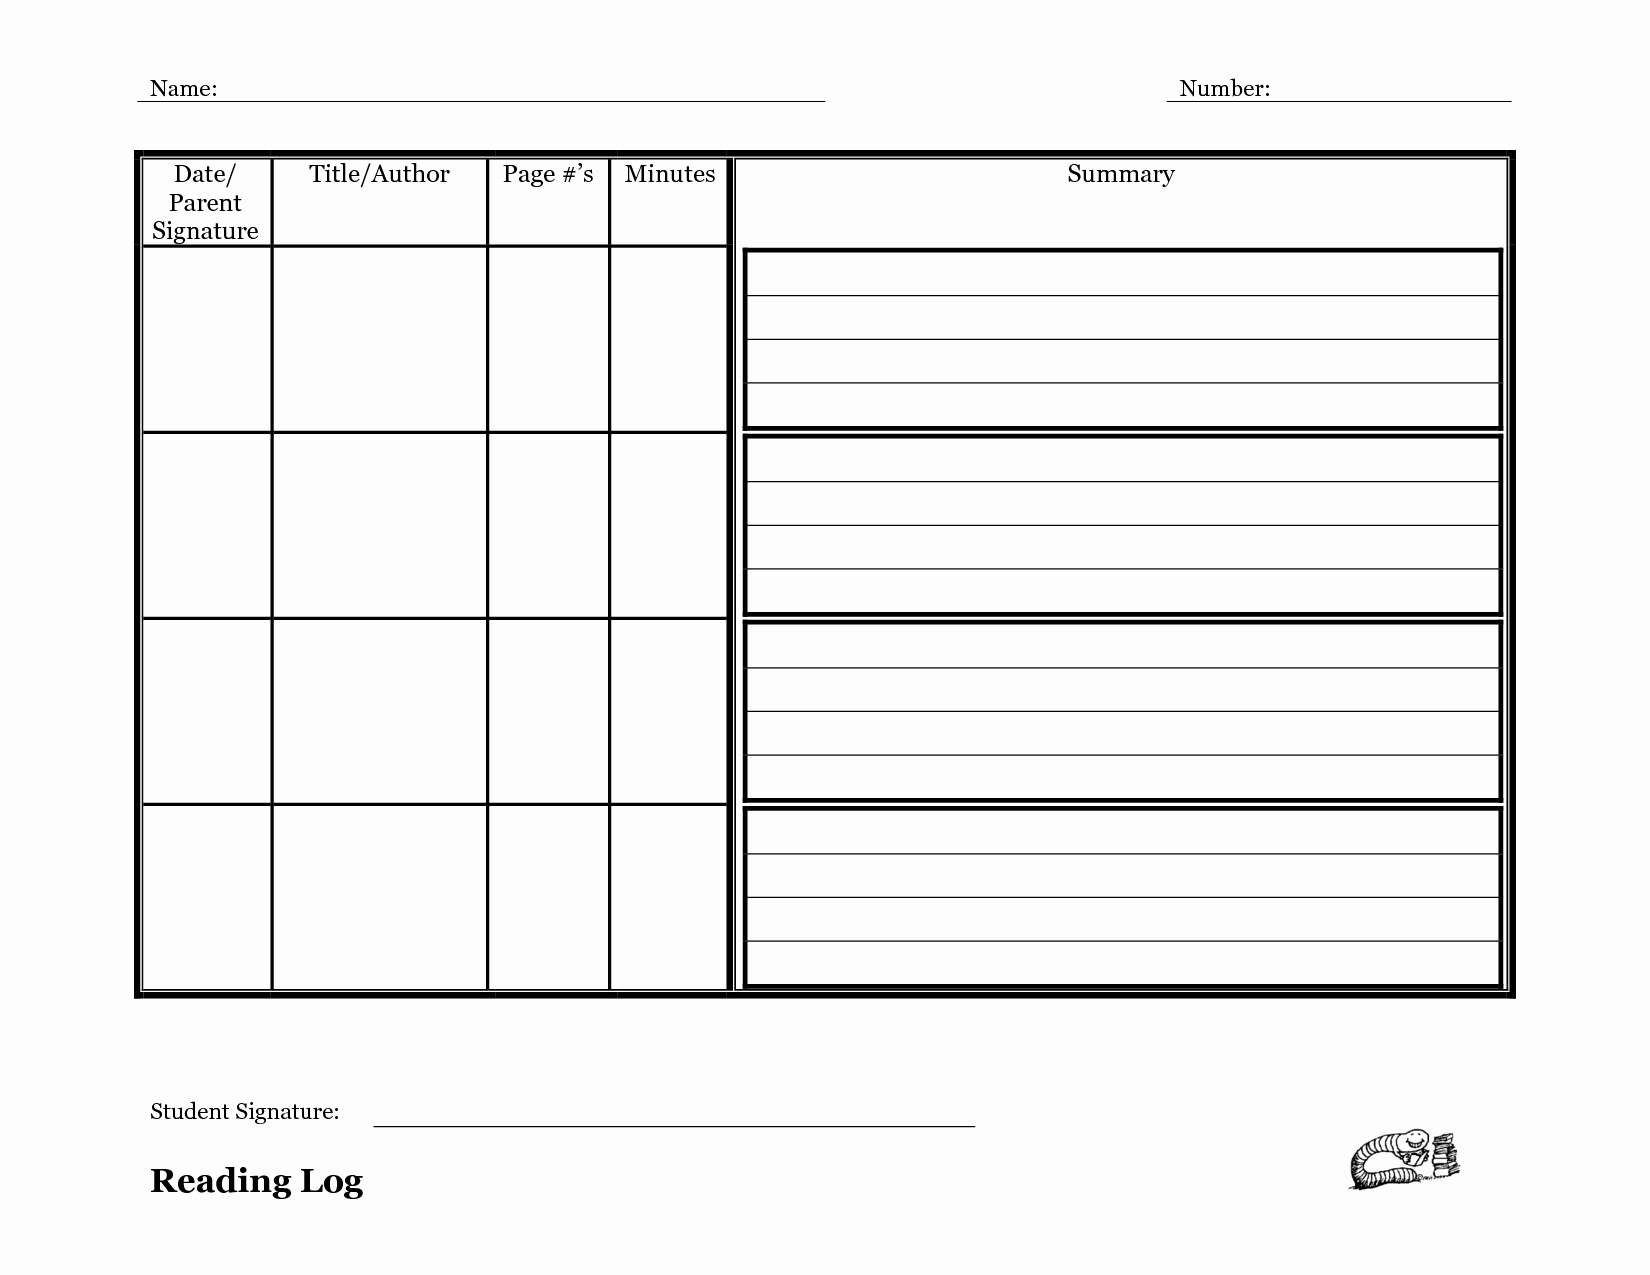 Reading Log Template Middle School Lovely Reading Log Template with Summary Google Search